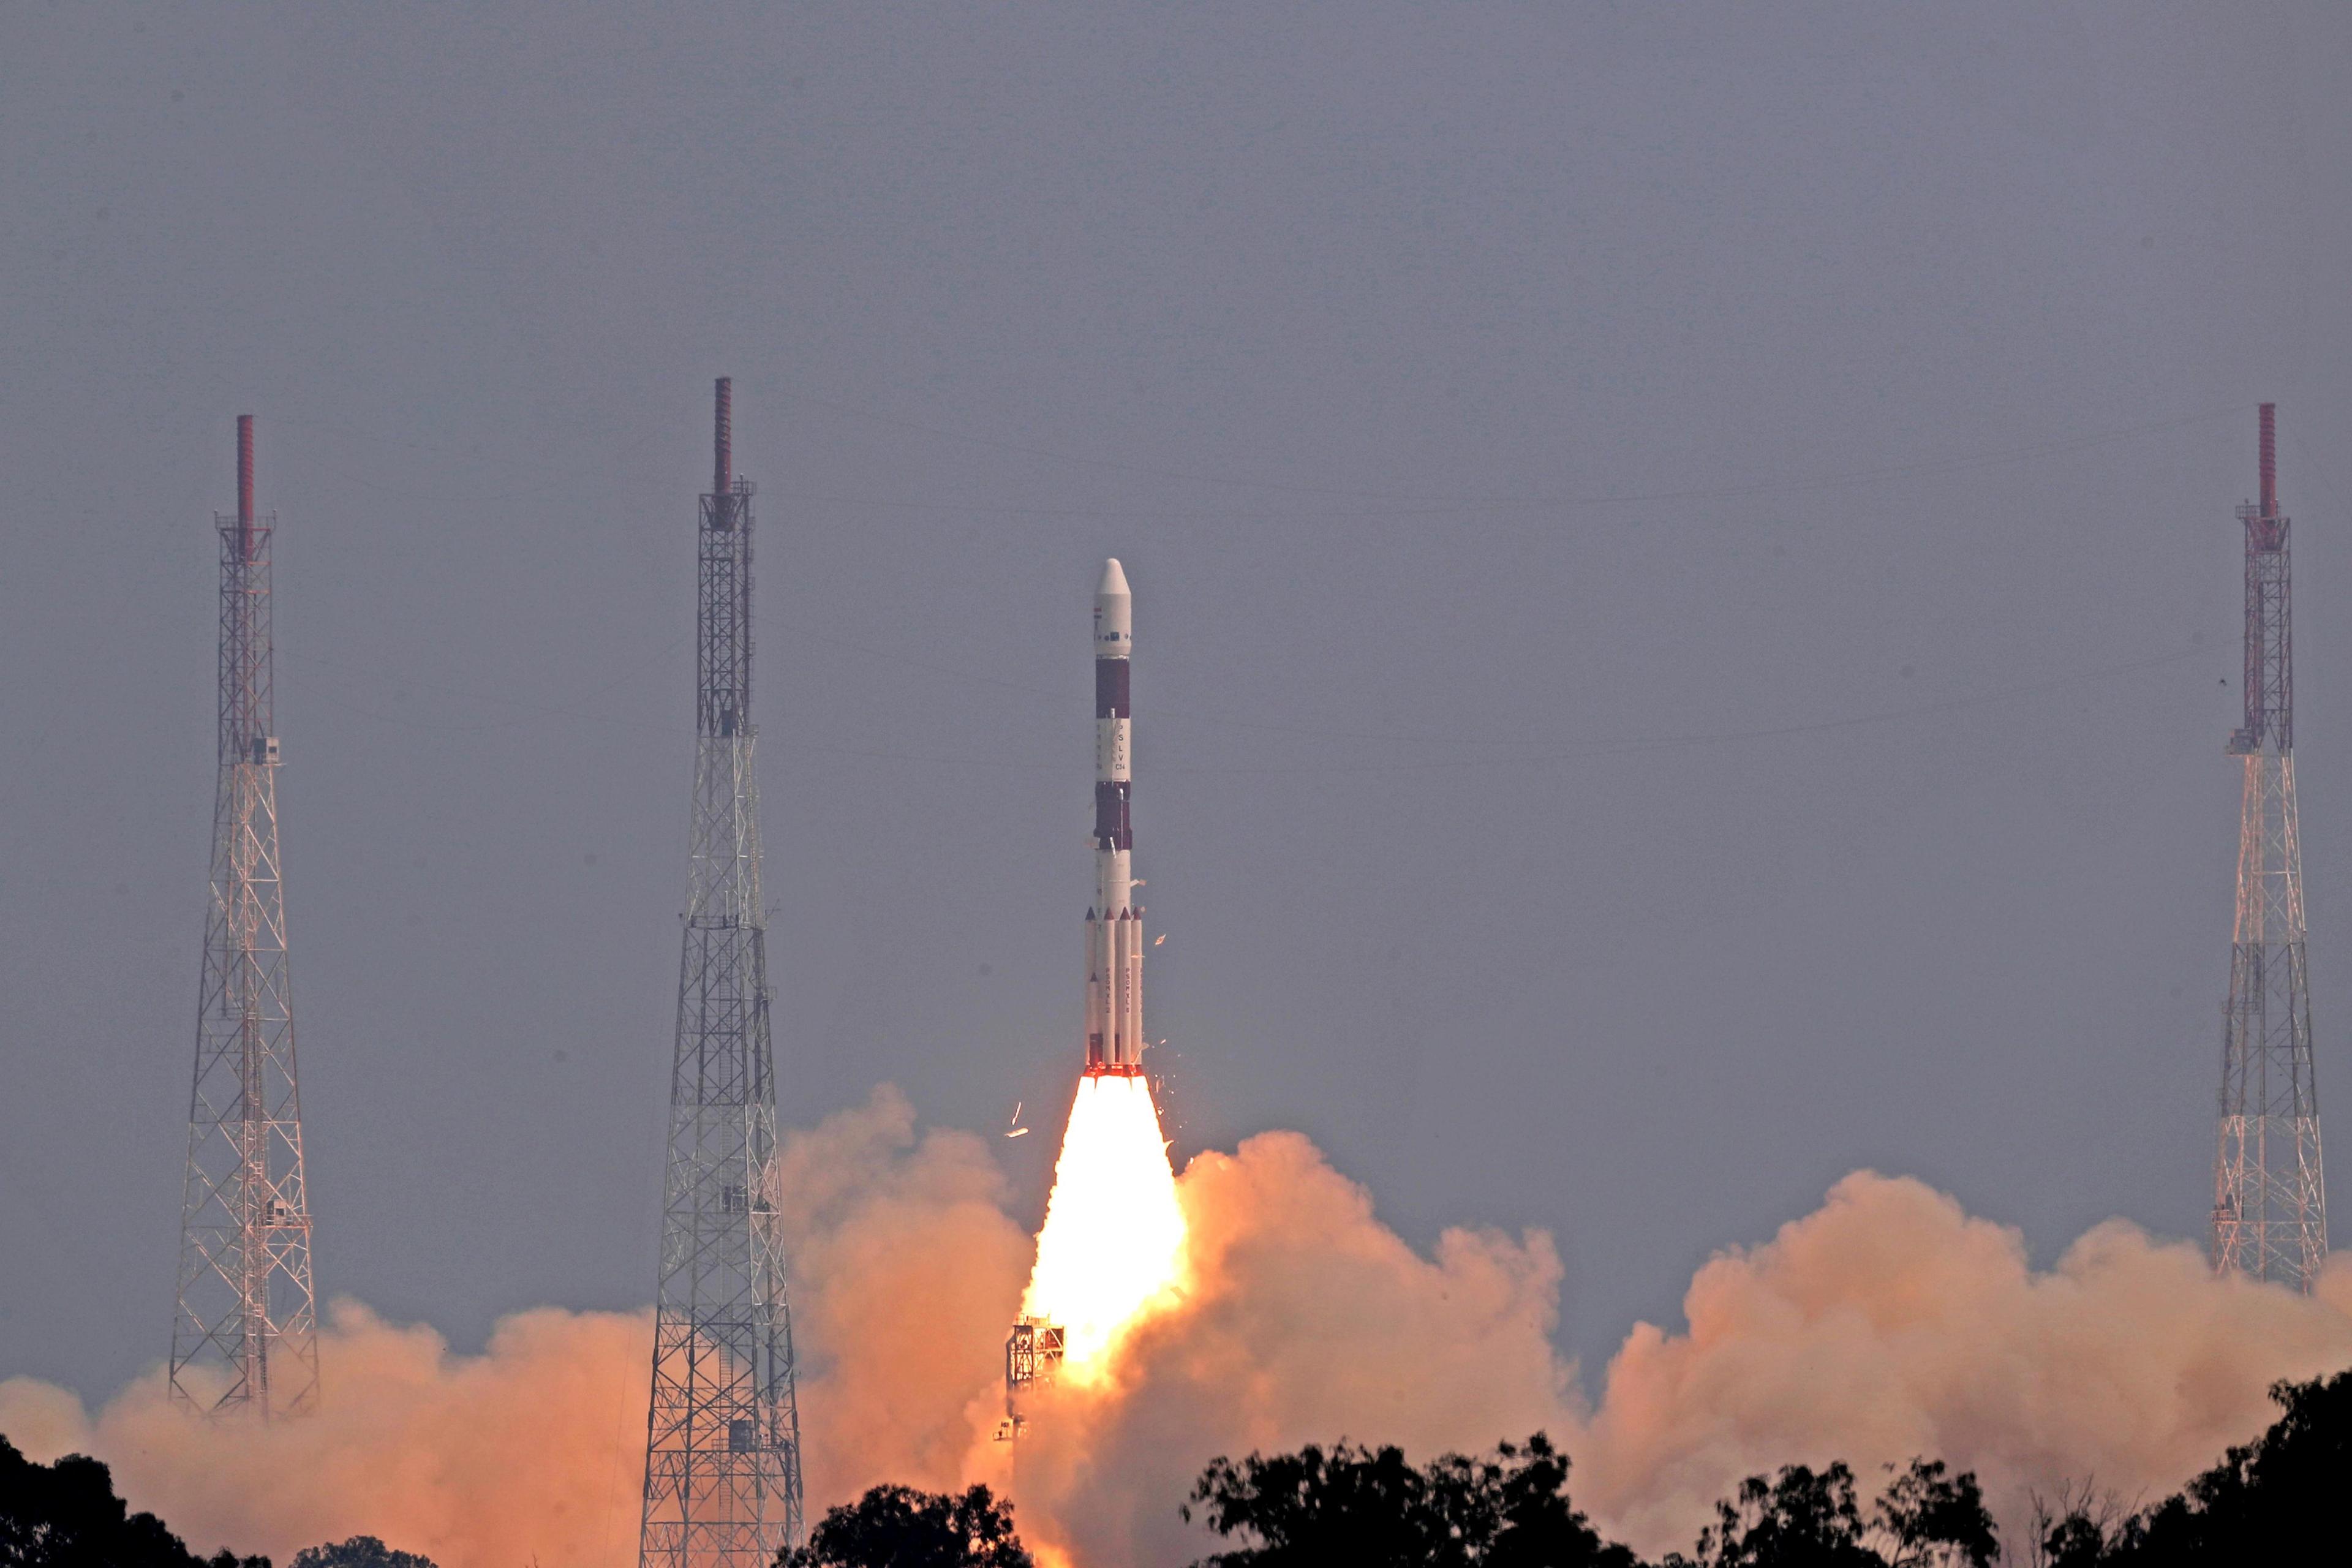 The Indian Space Research Organisation's PSLV-XL launch vehicle launches from First Launch Pad in Sriharikota, India